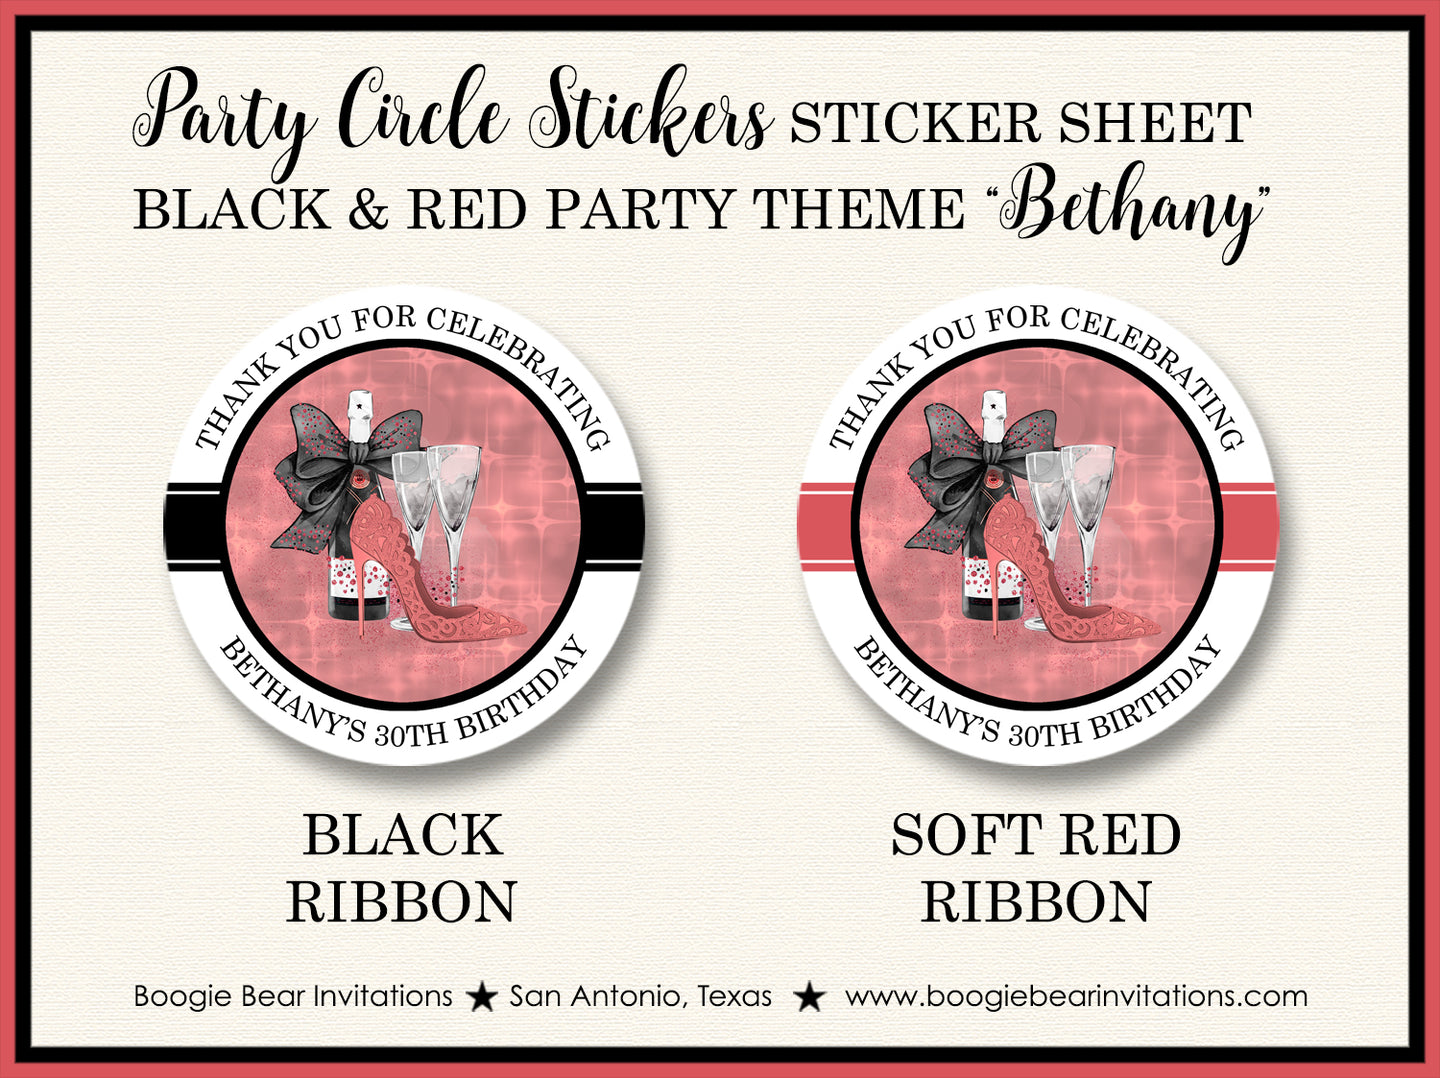 Black Red Fashion Party Stickers Circle Sheet Round Birthday High Heels Chic Boogie Bear Invitations Bethany Theme